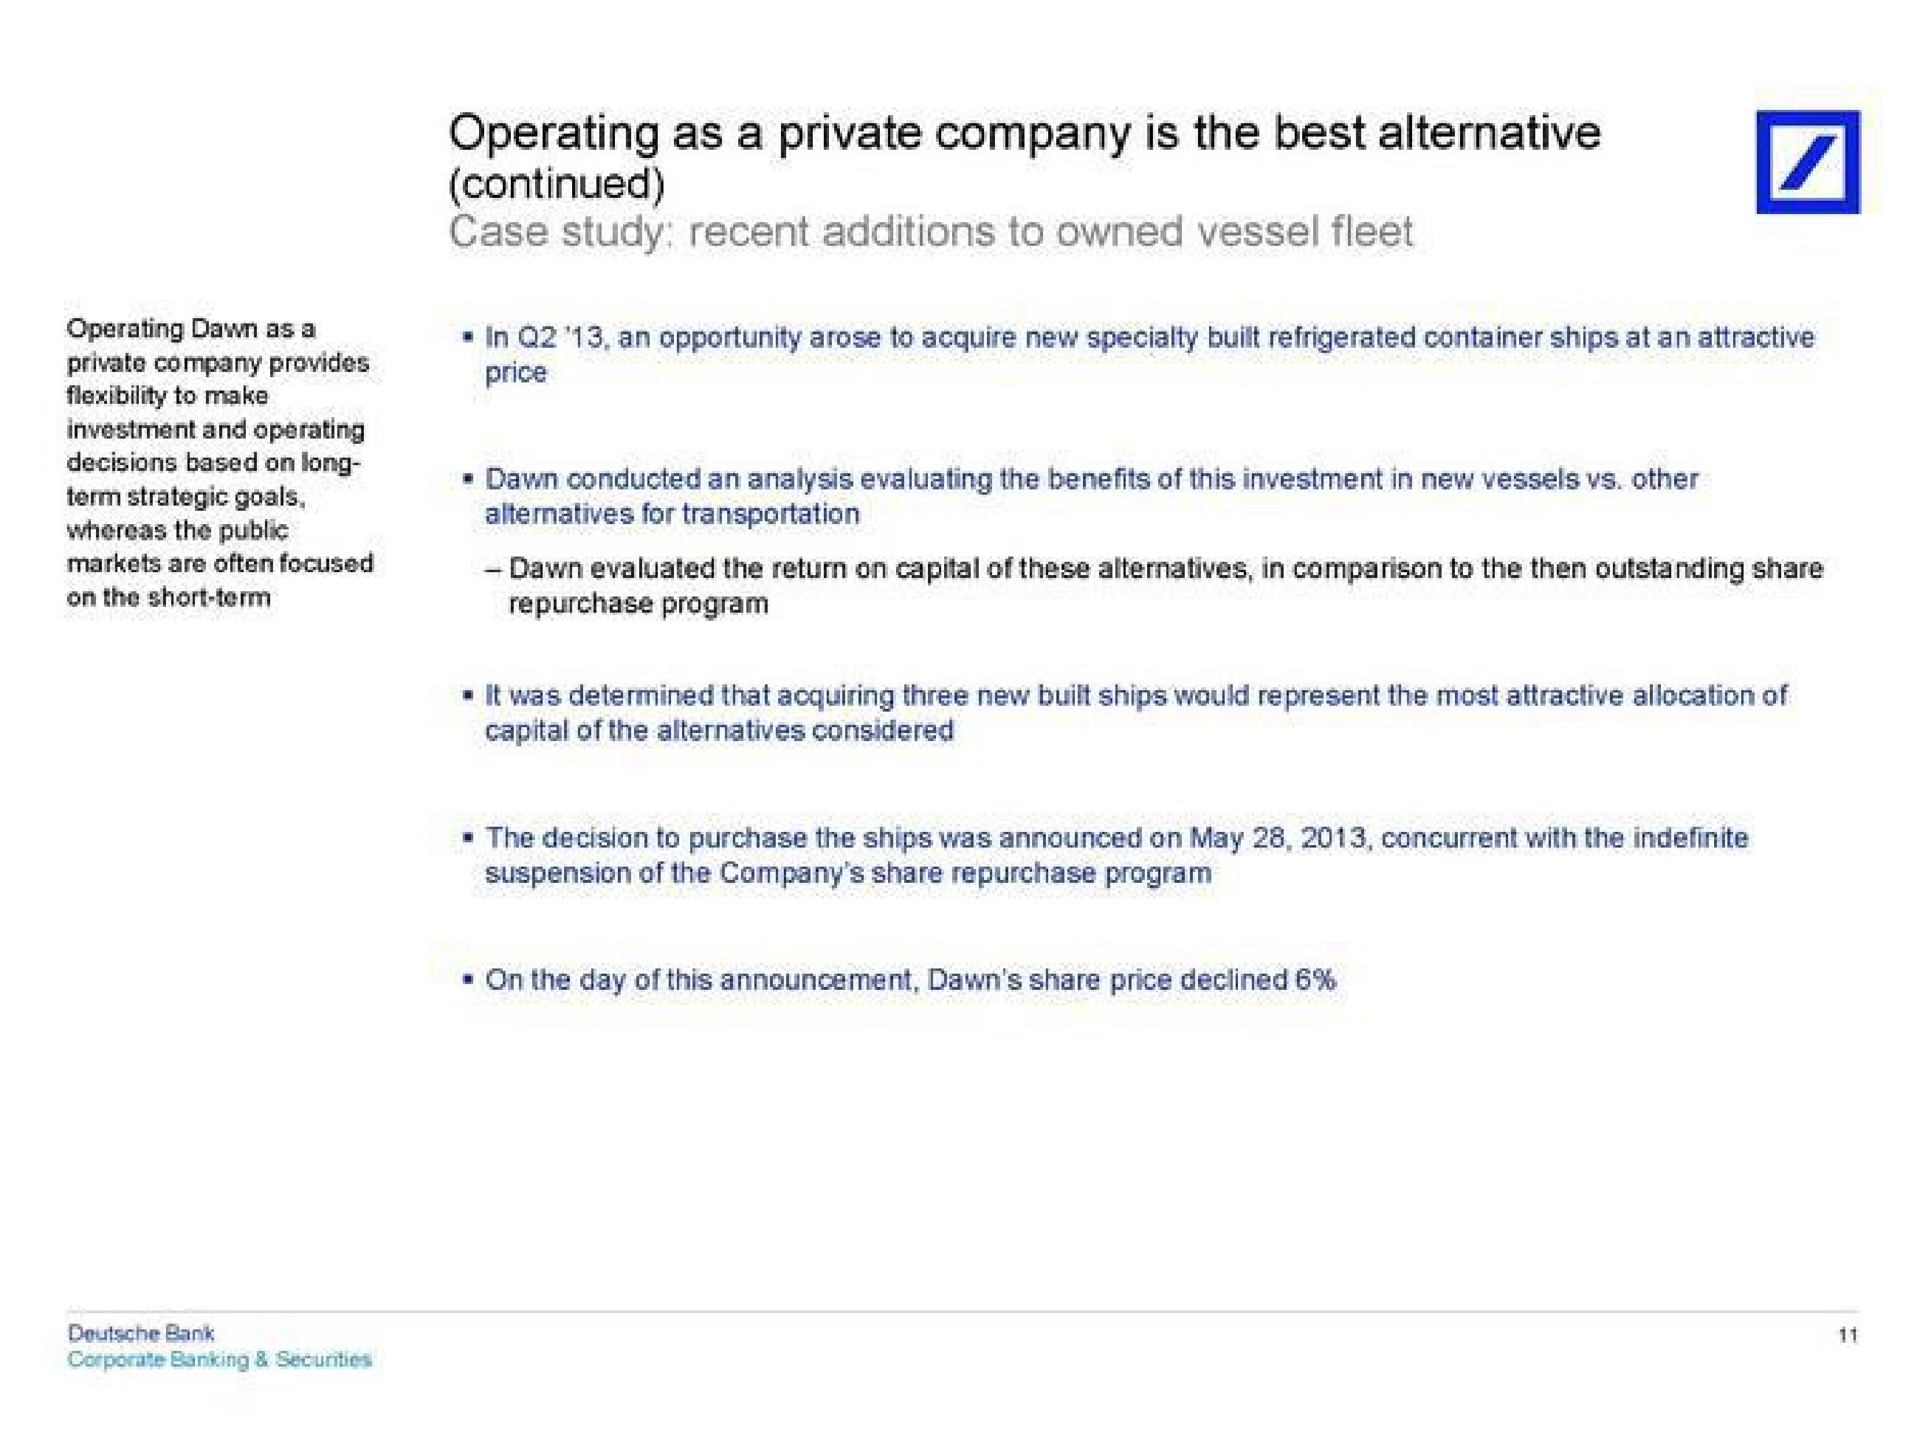 operating as a private company is the best alternative continued | Deutsche Bank